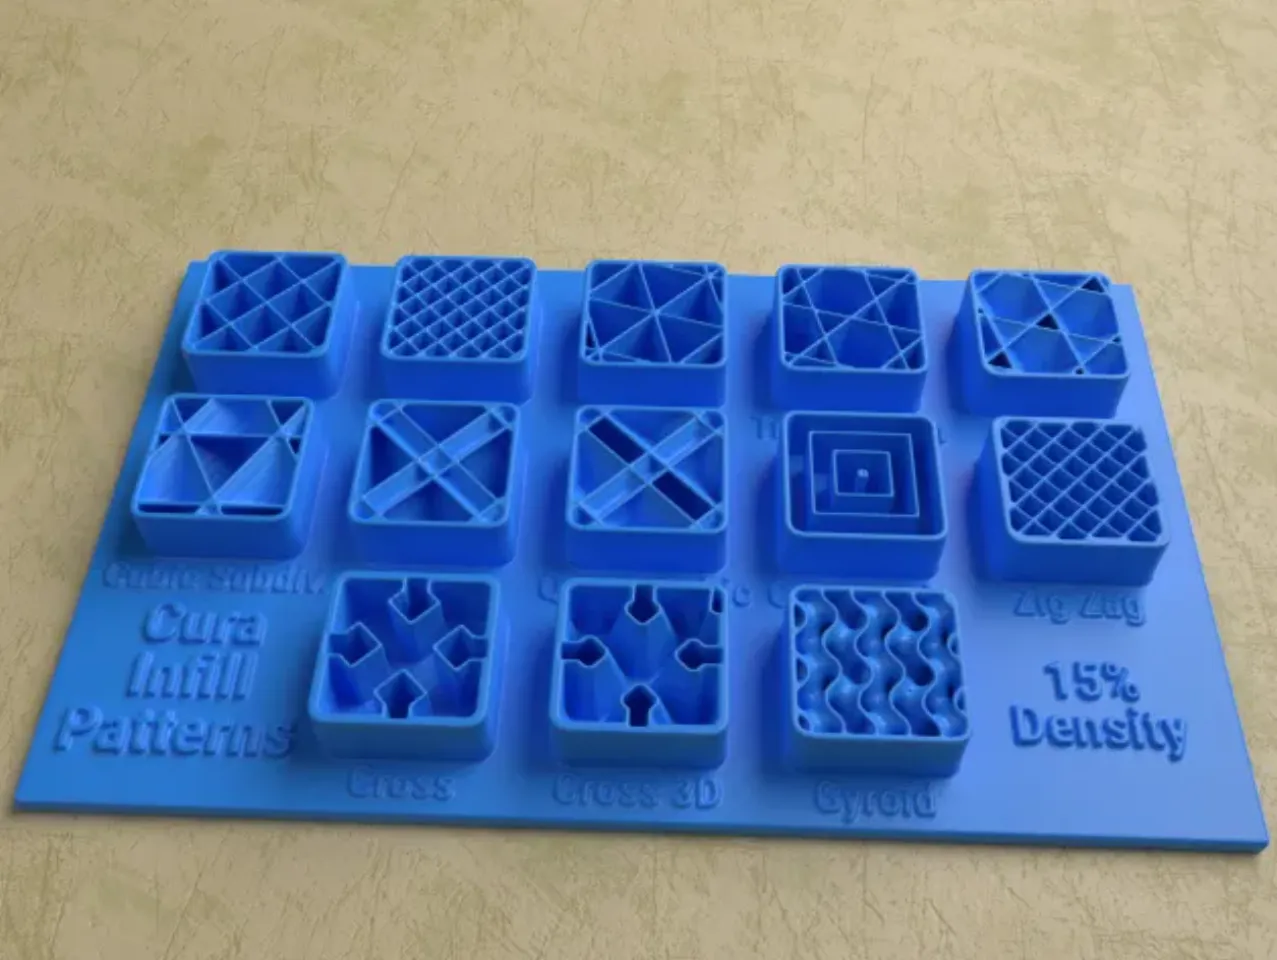 Cura Infill Patterns Display Models by Lyl3